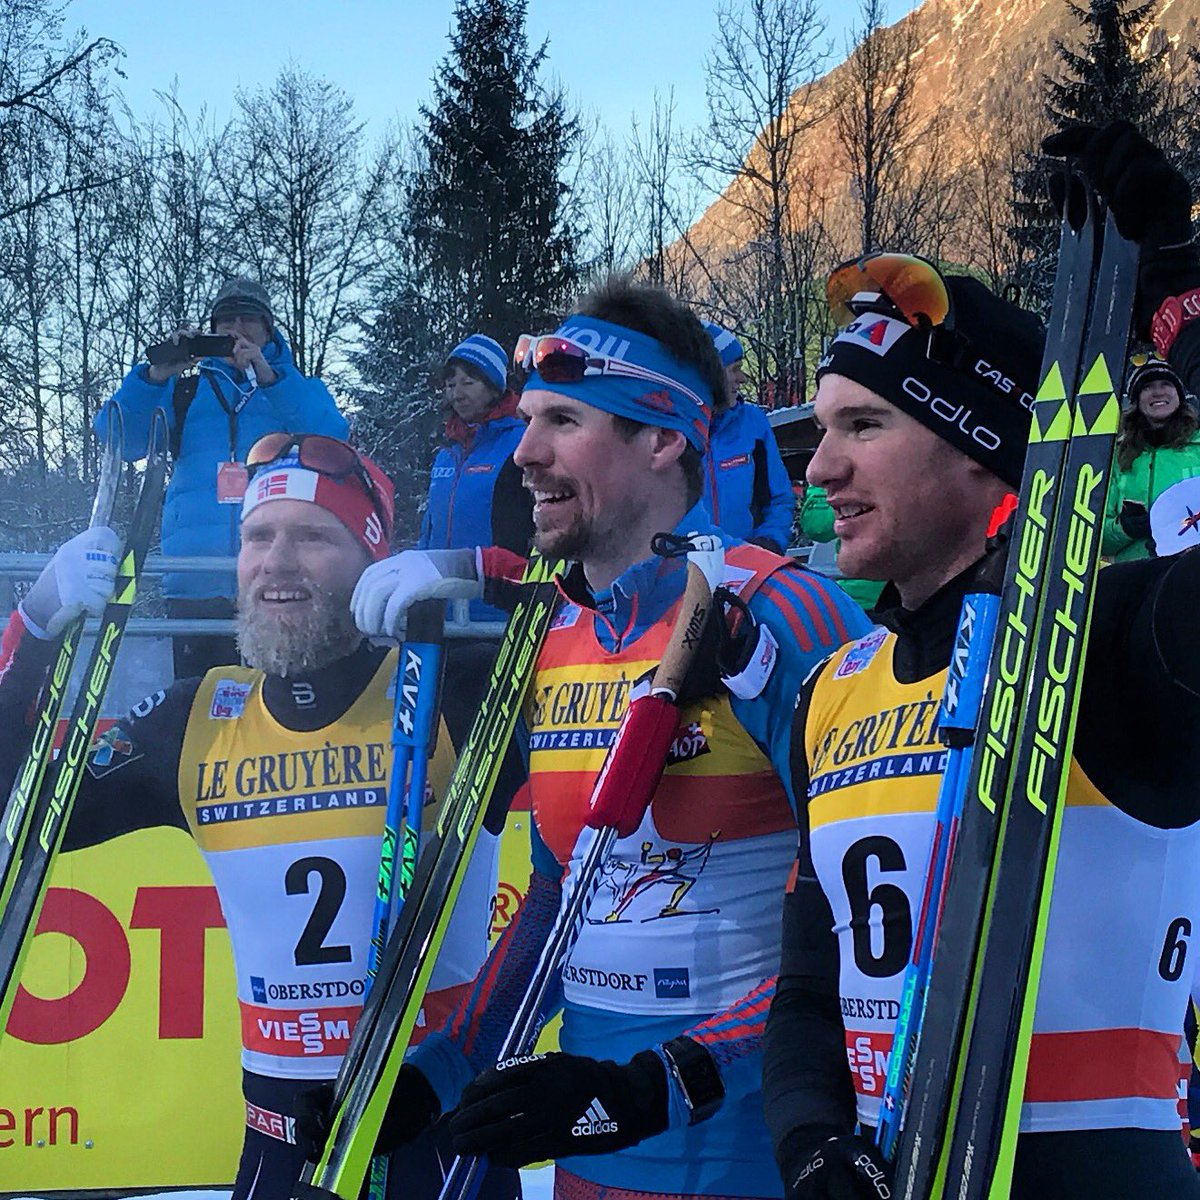 The men's 20 k skiathlon podium at Stage 3 of the Tour de Ski in Oberstdorf, Germany, with Russian winner Sergey Ustiugov (c), Norway's runner-up Martin Johnsrud Sundby (l), and Switzerland's Dario Cologna (r) in third. (Photo: FIS Cross Country/Twitter)